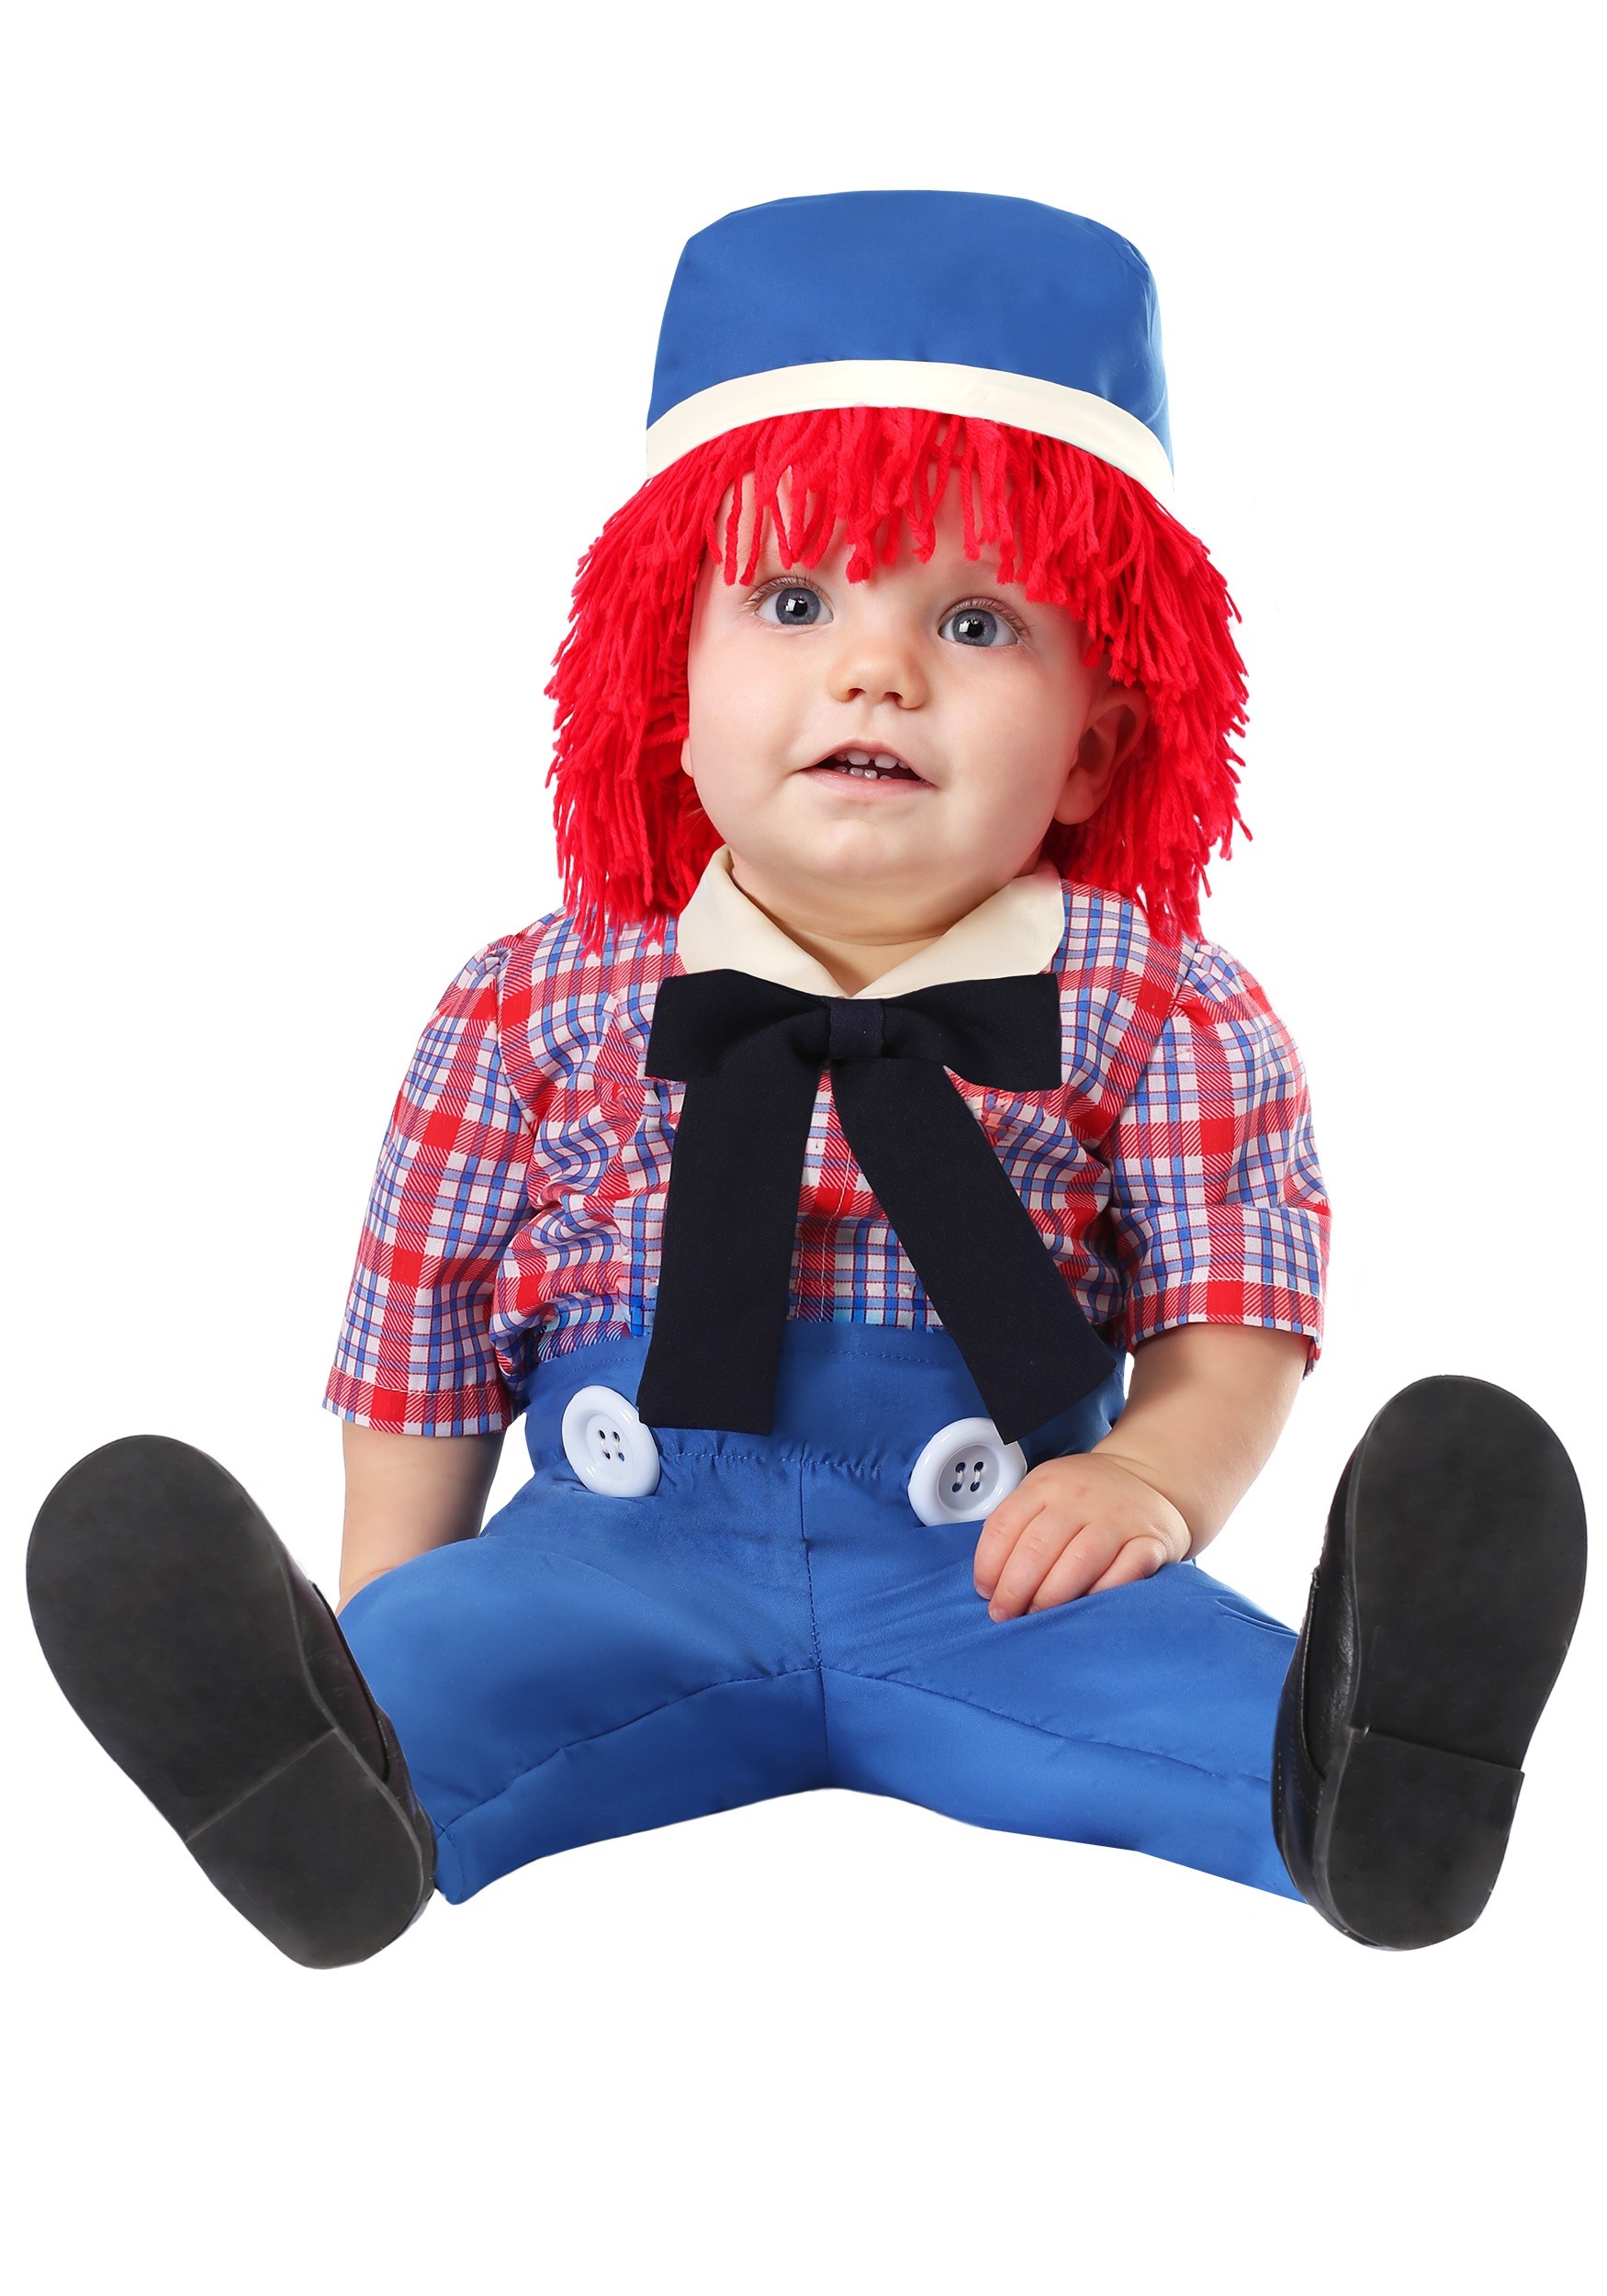 Photos - Fancy Dress FUN Costumes Infant Raggedy Andy Costume Blue/Red FUN2974IN